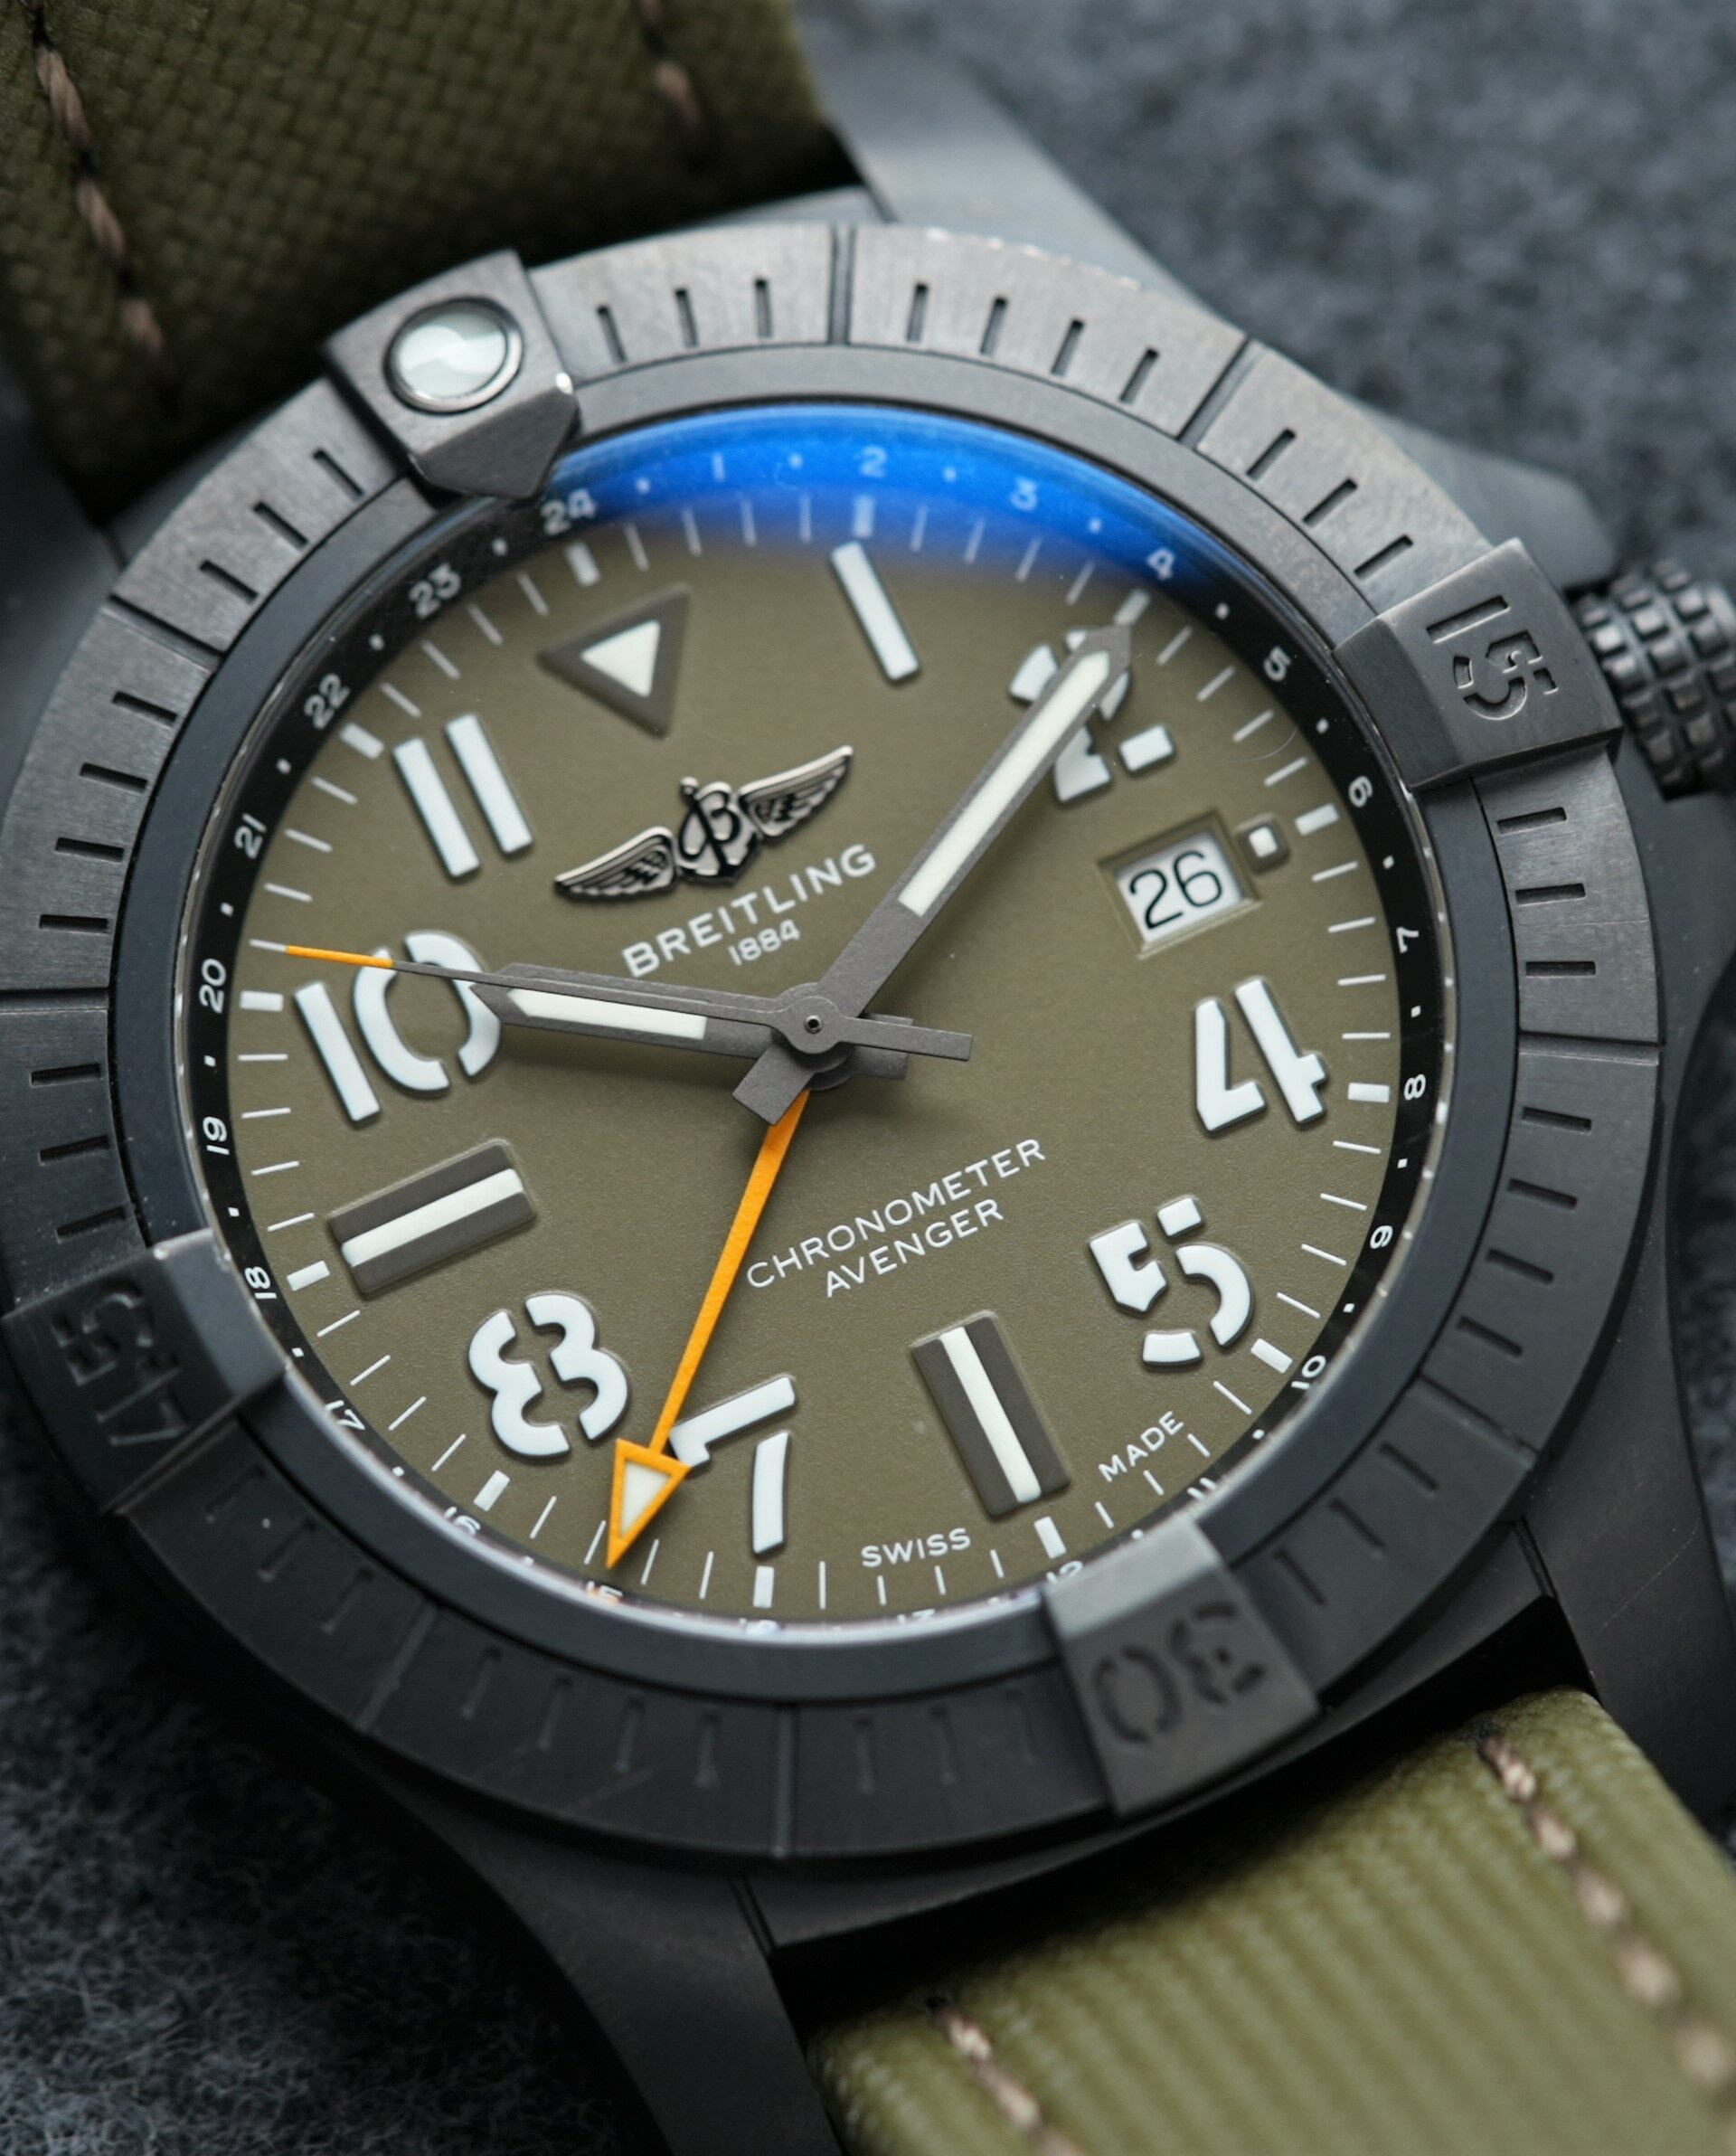 Breitling Avenger Automatic Gmt 45 Night Mission Limited V323952A1L1X1 wristwatch on display.